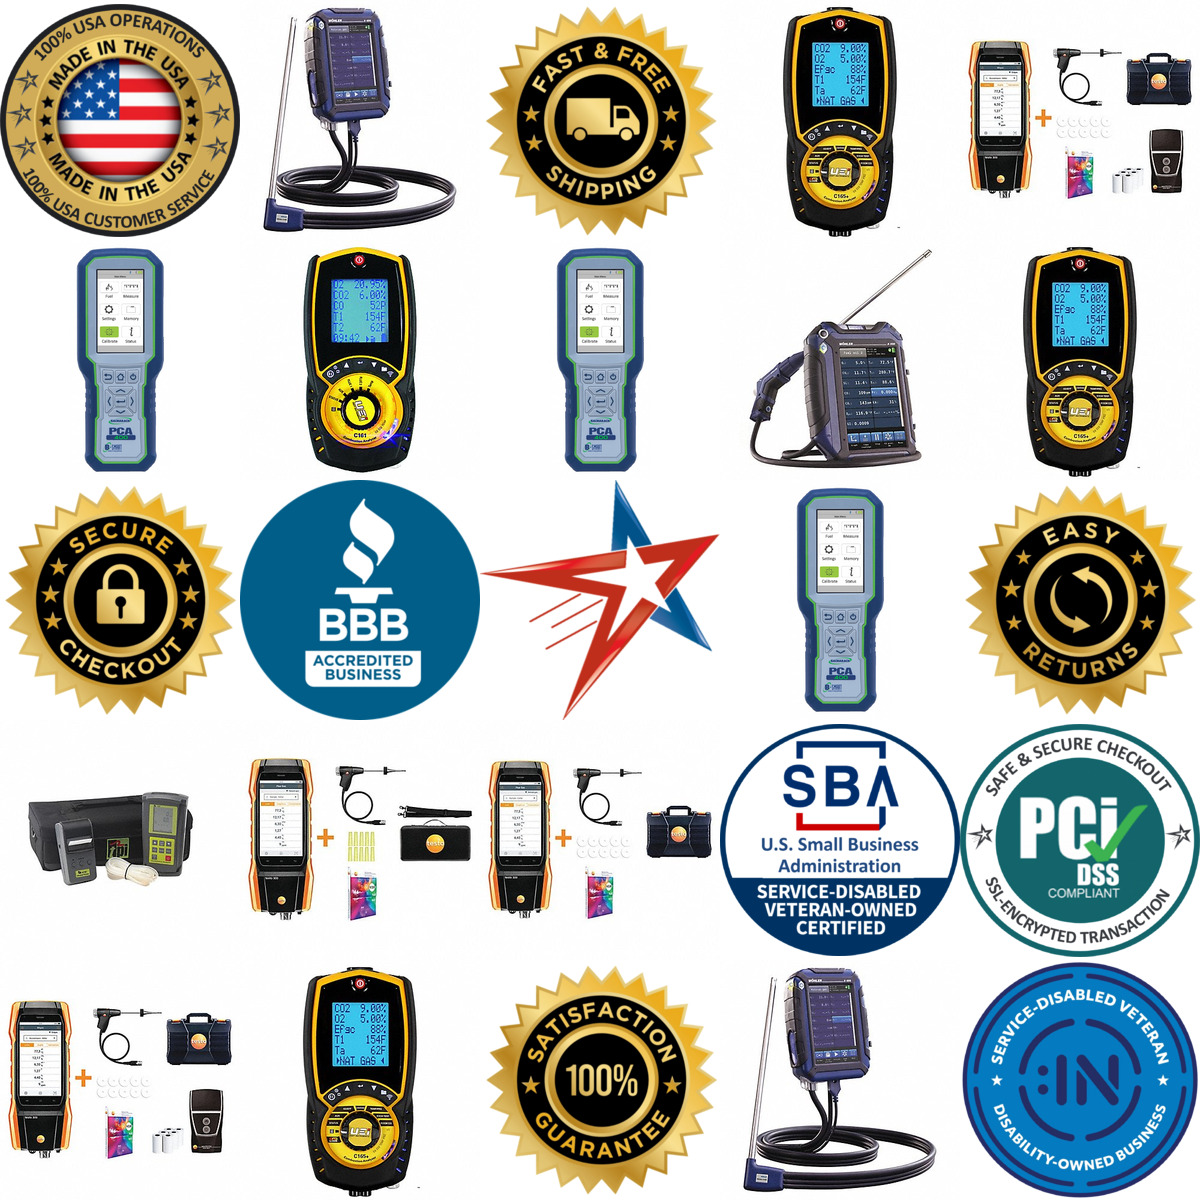 A selection of Combustion Analyzers products on GoVets